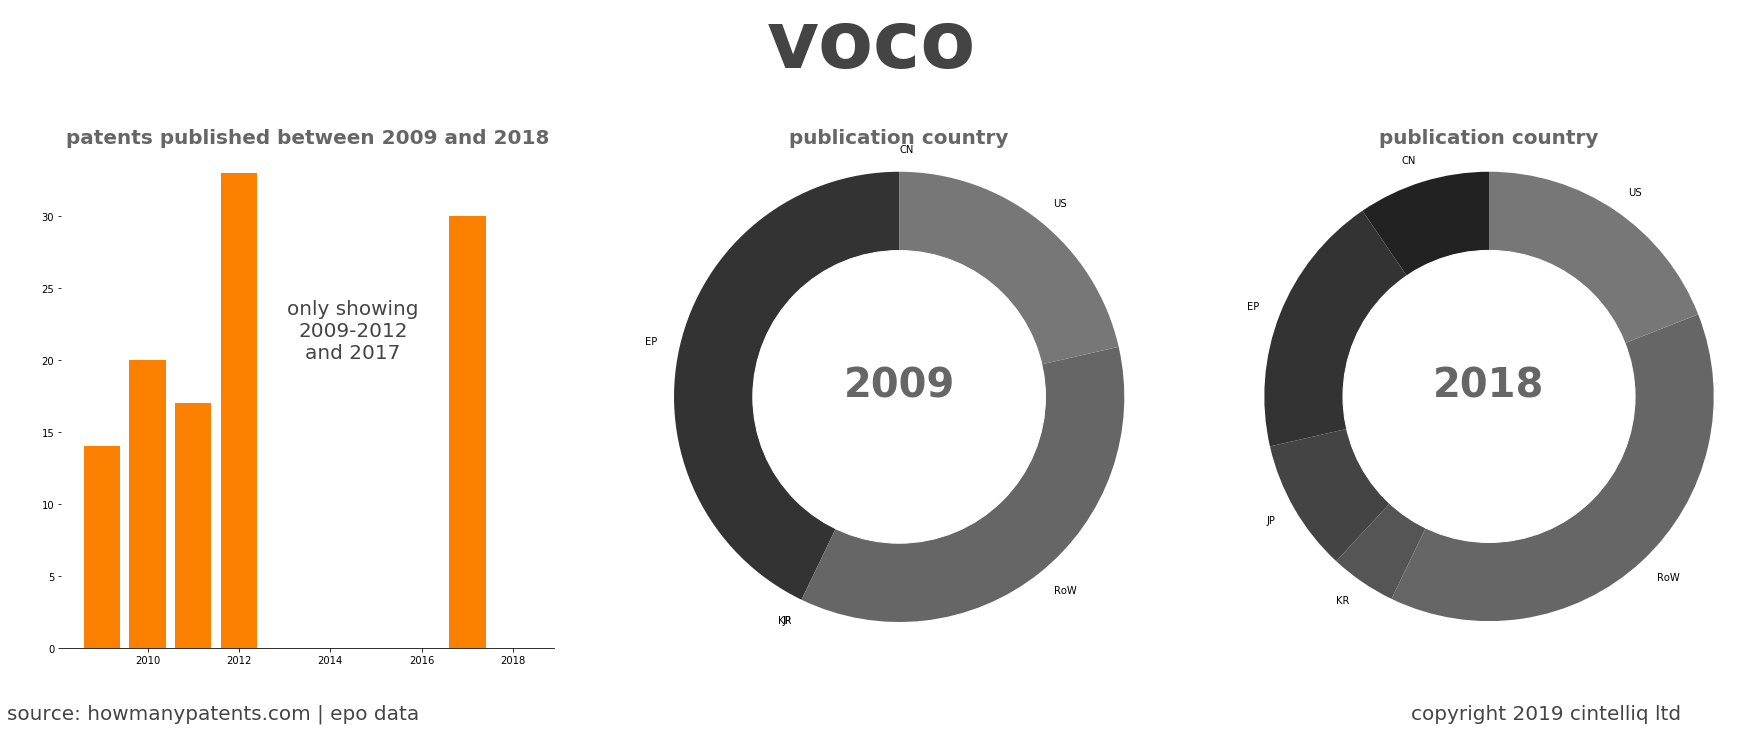 summary of patents for Voco